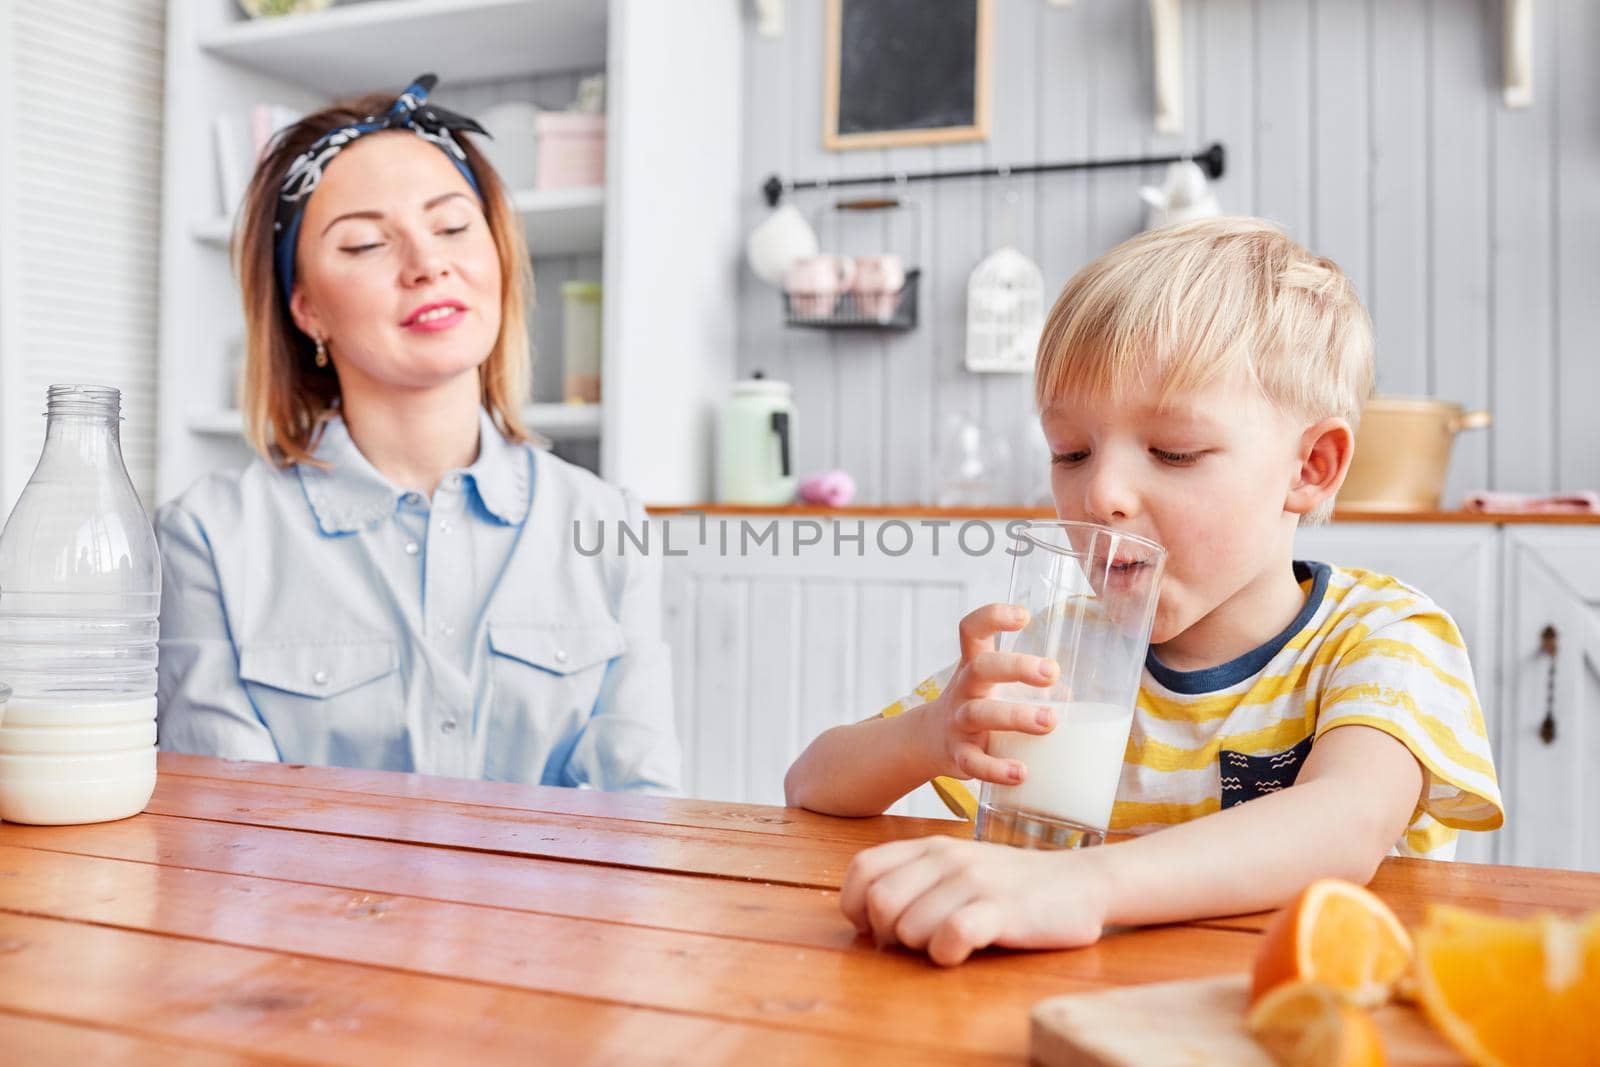 Little boy are smiling while having a breakfast in kitchen. Mom is pouring milk into glass.